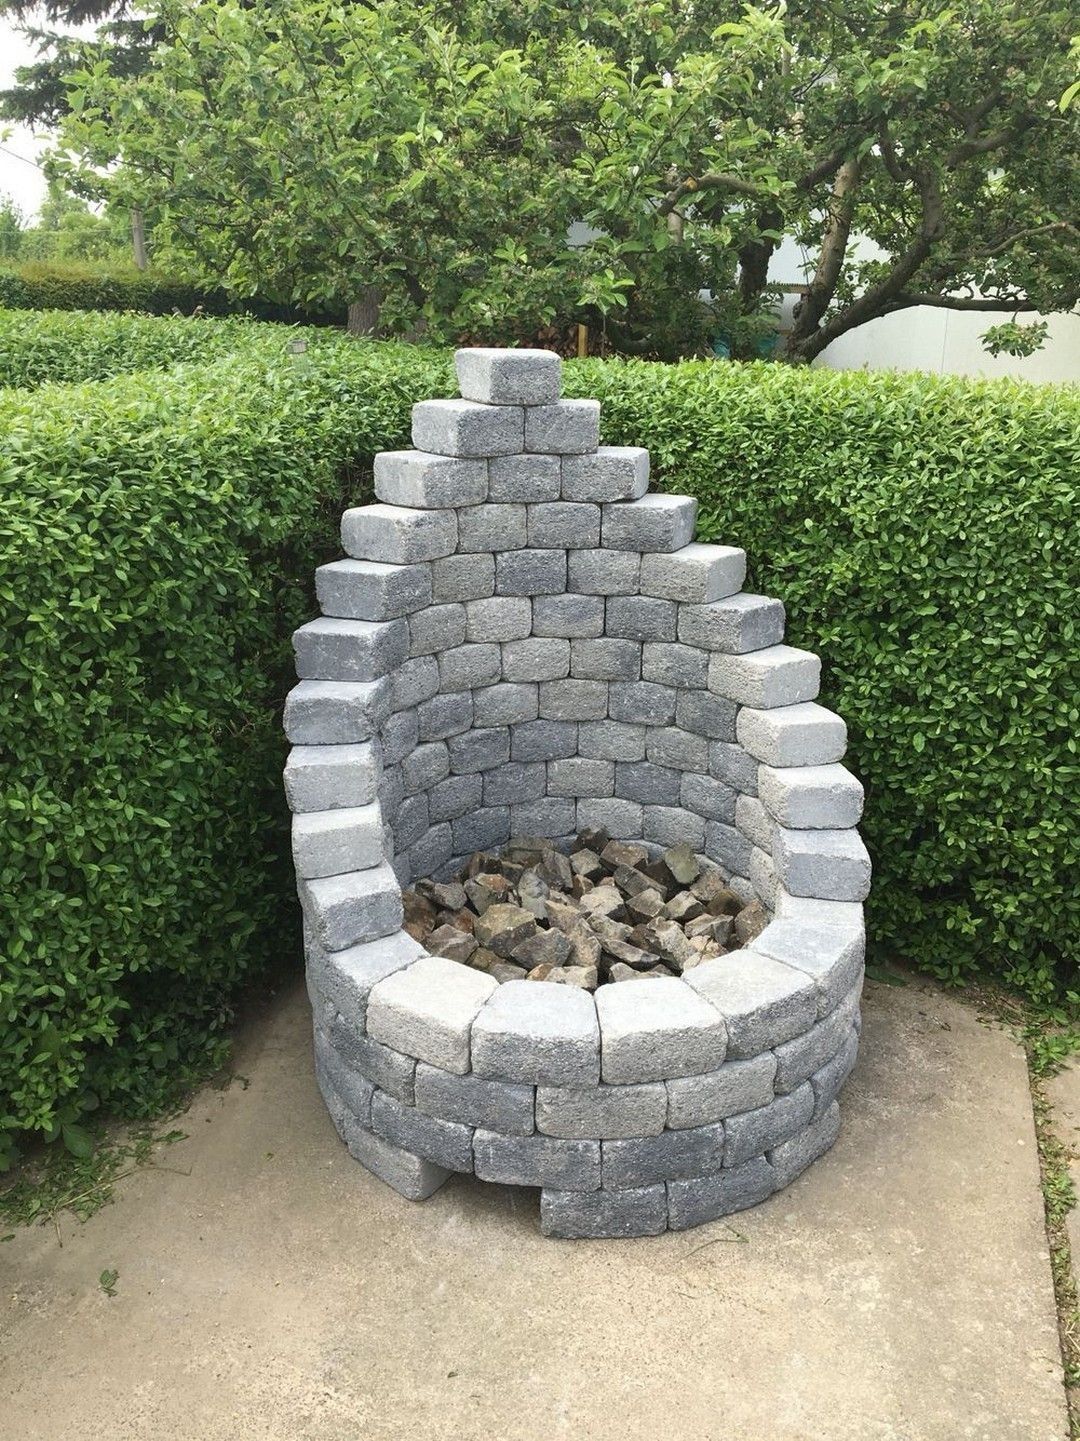 Want a Great Accent To Your Backyard, But Tight On Space? Try This DIY Fire Place/Pit Build T... - Want a Great Accent To Your Backyard, But Tight On Space? Try This DIY Fire Place/Pit Build T... -   14 diy Outdoor fire pit ideas